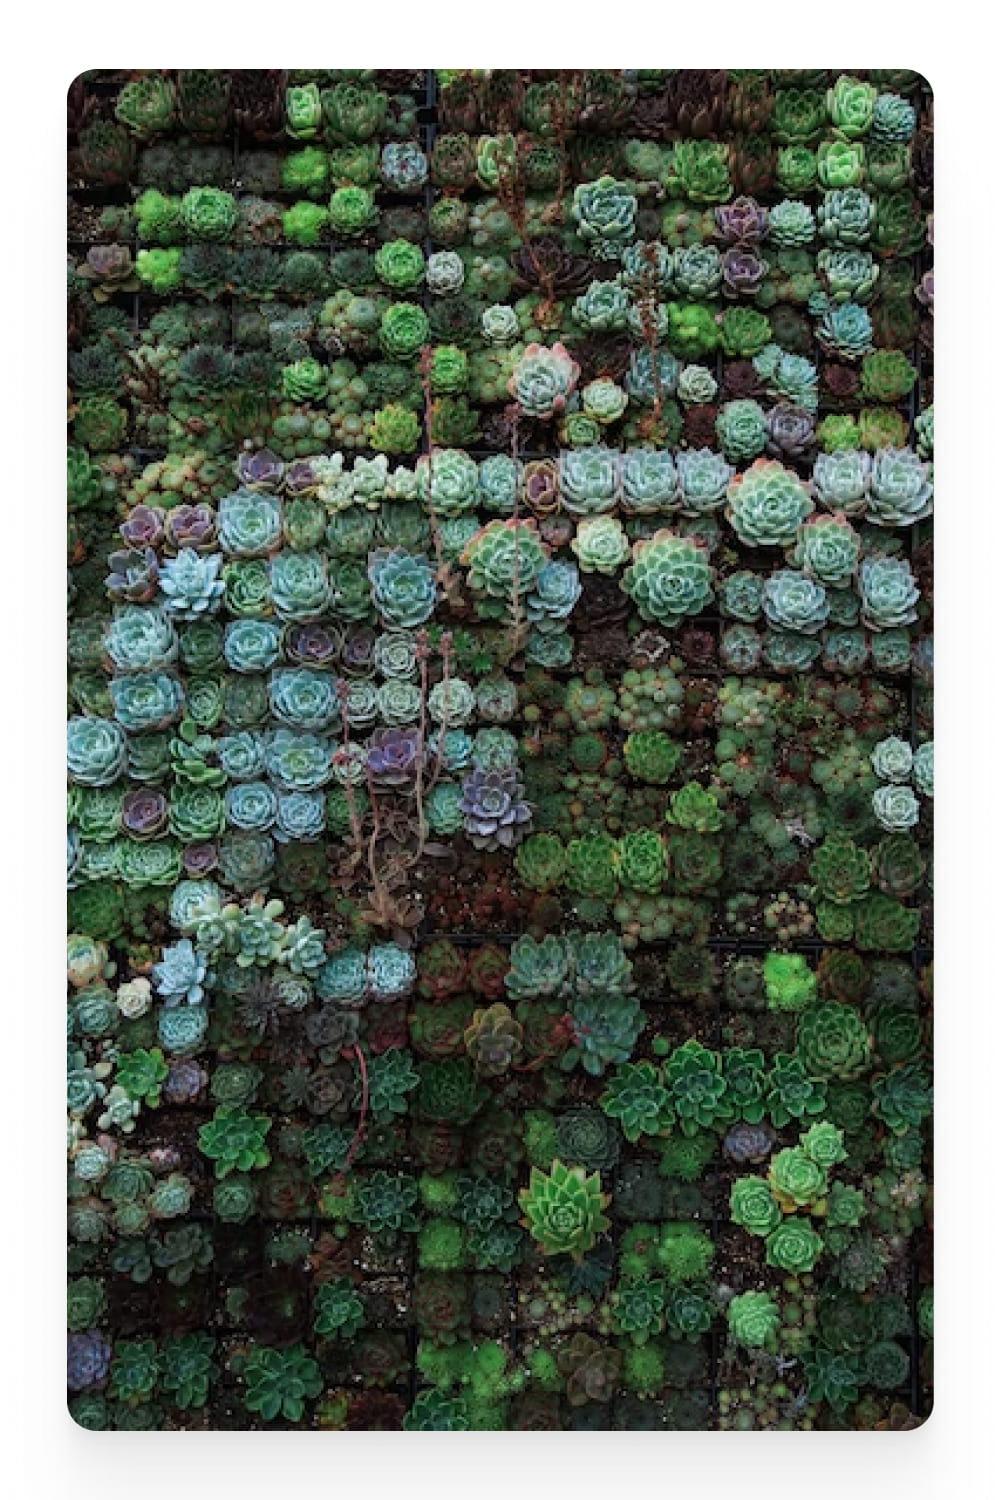 Photo of a large number of succulents from above.